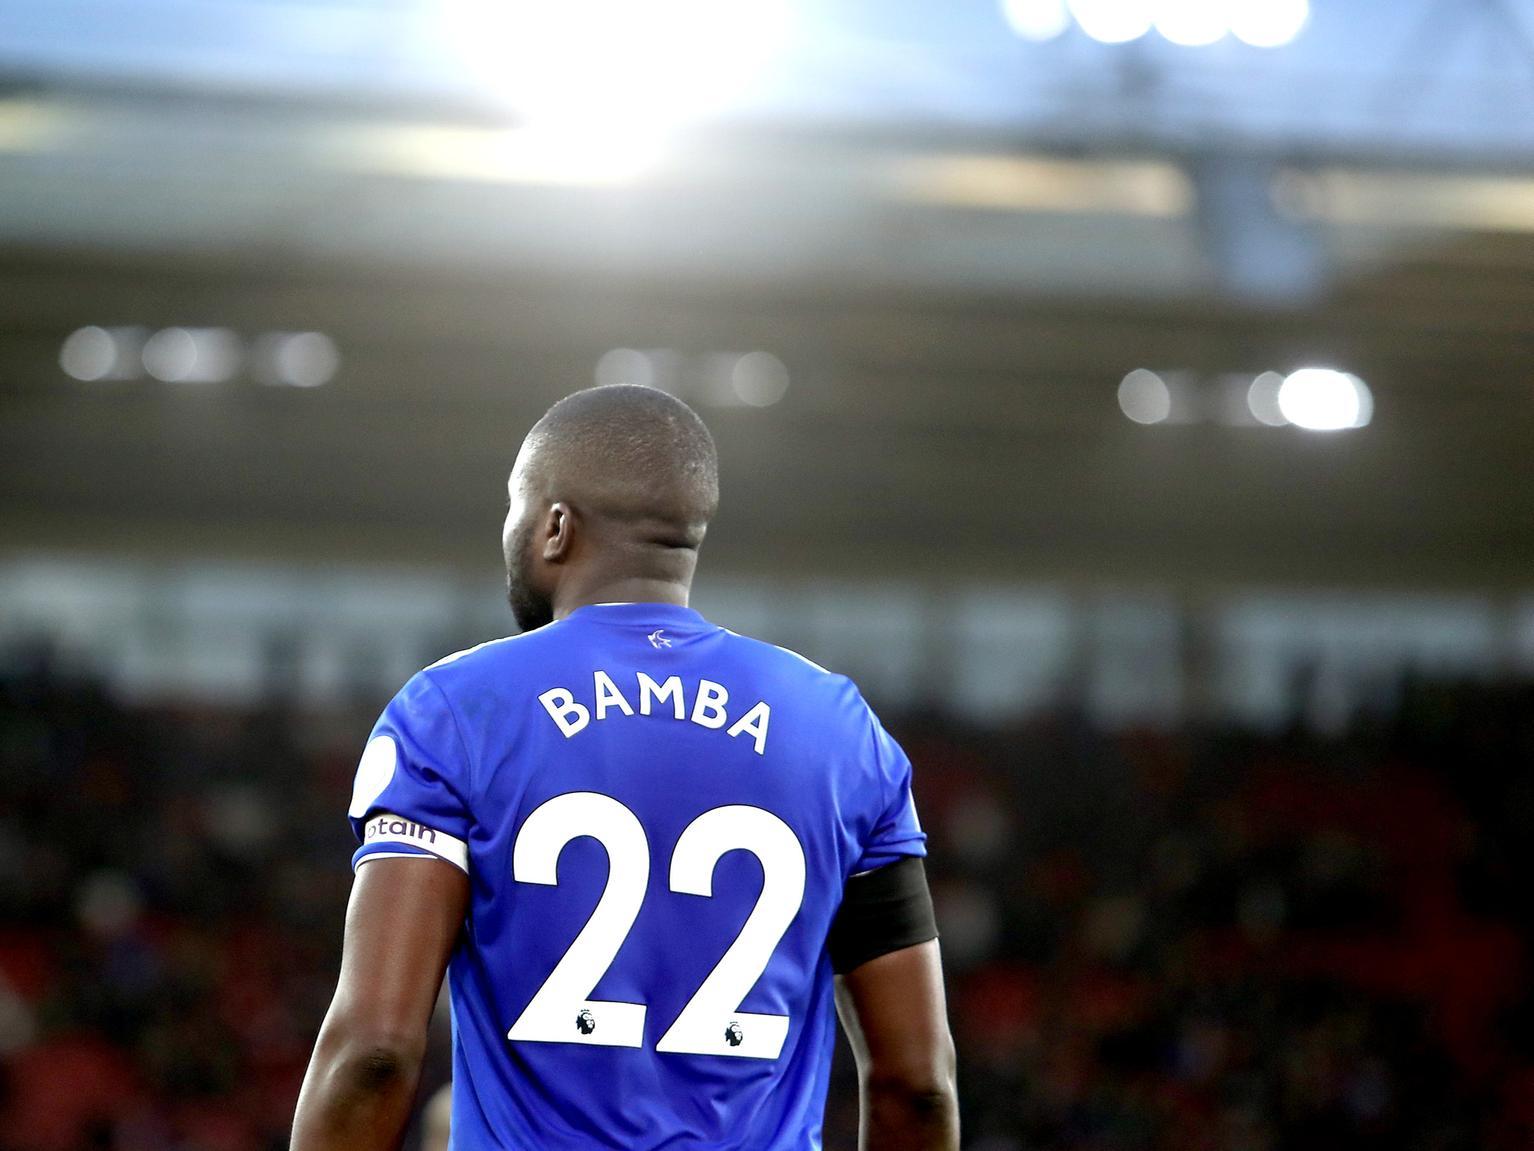 Cardiff City are said to have asked defender Sol Bamba to become their caretaker coach, as they continue to whittle down their candidates to be the next manager. (Wales Online)